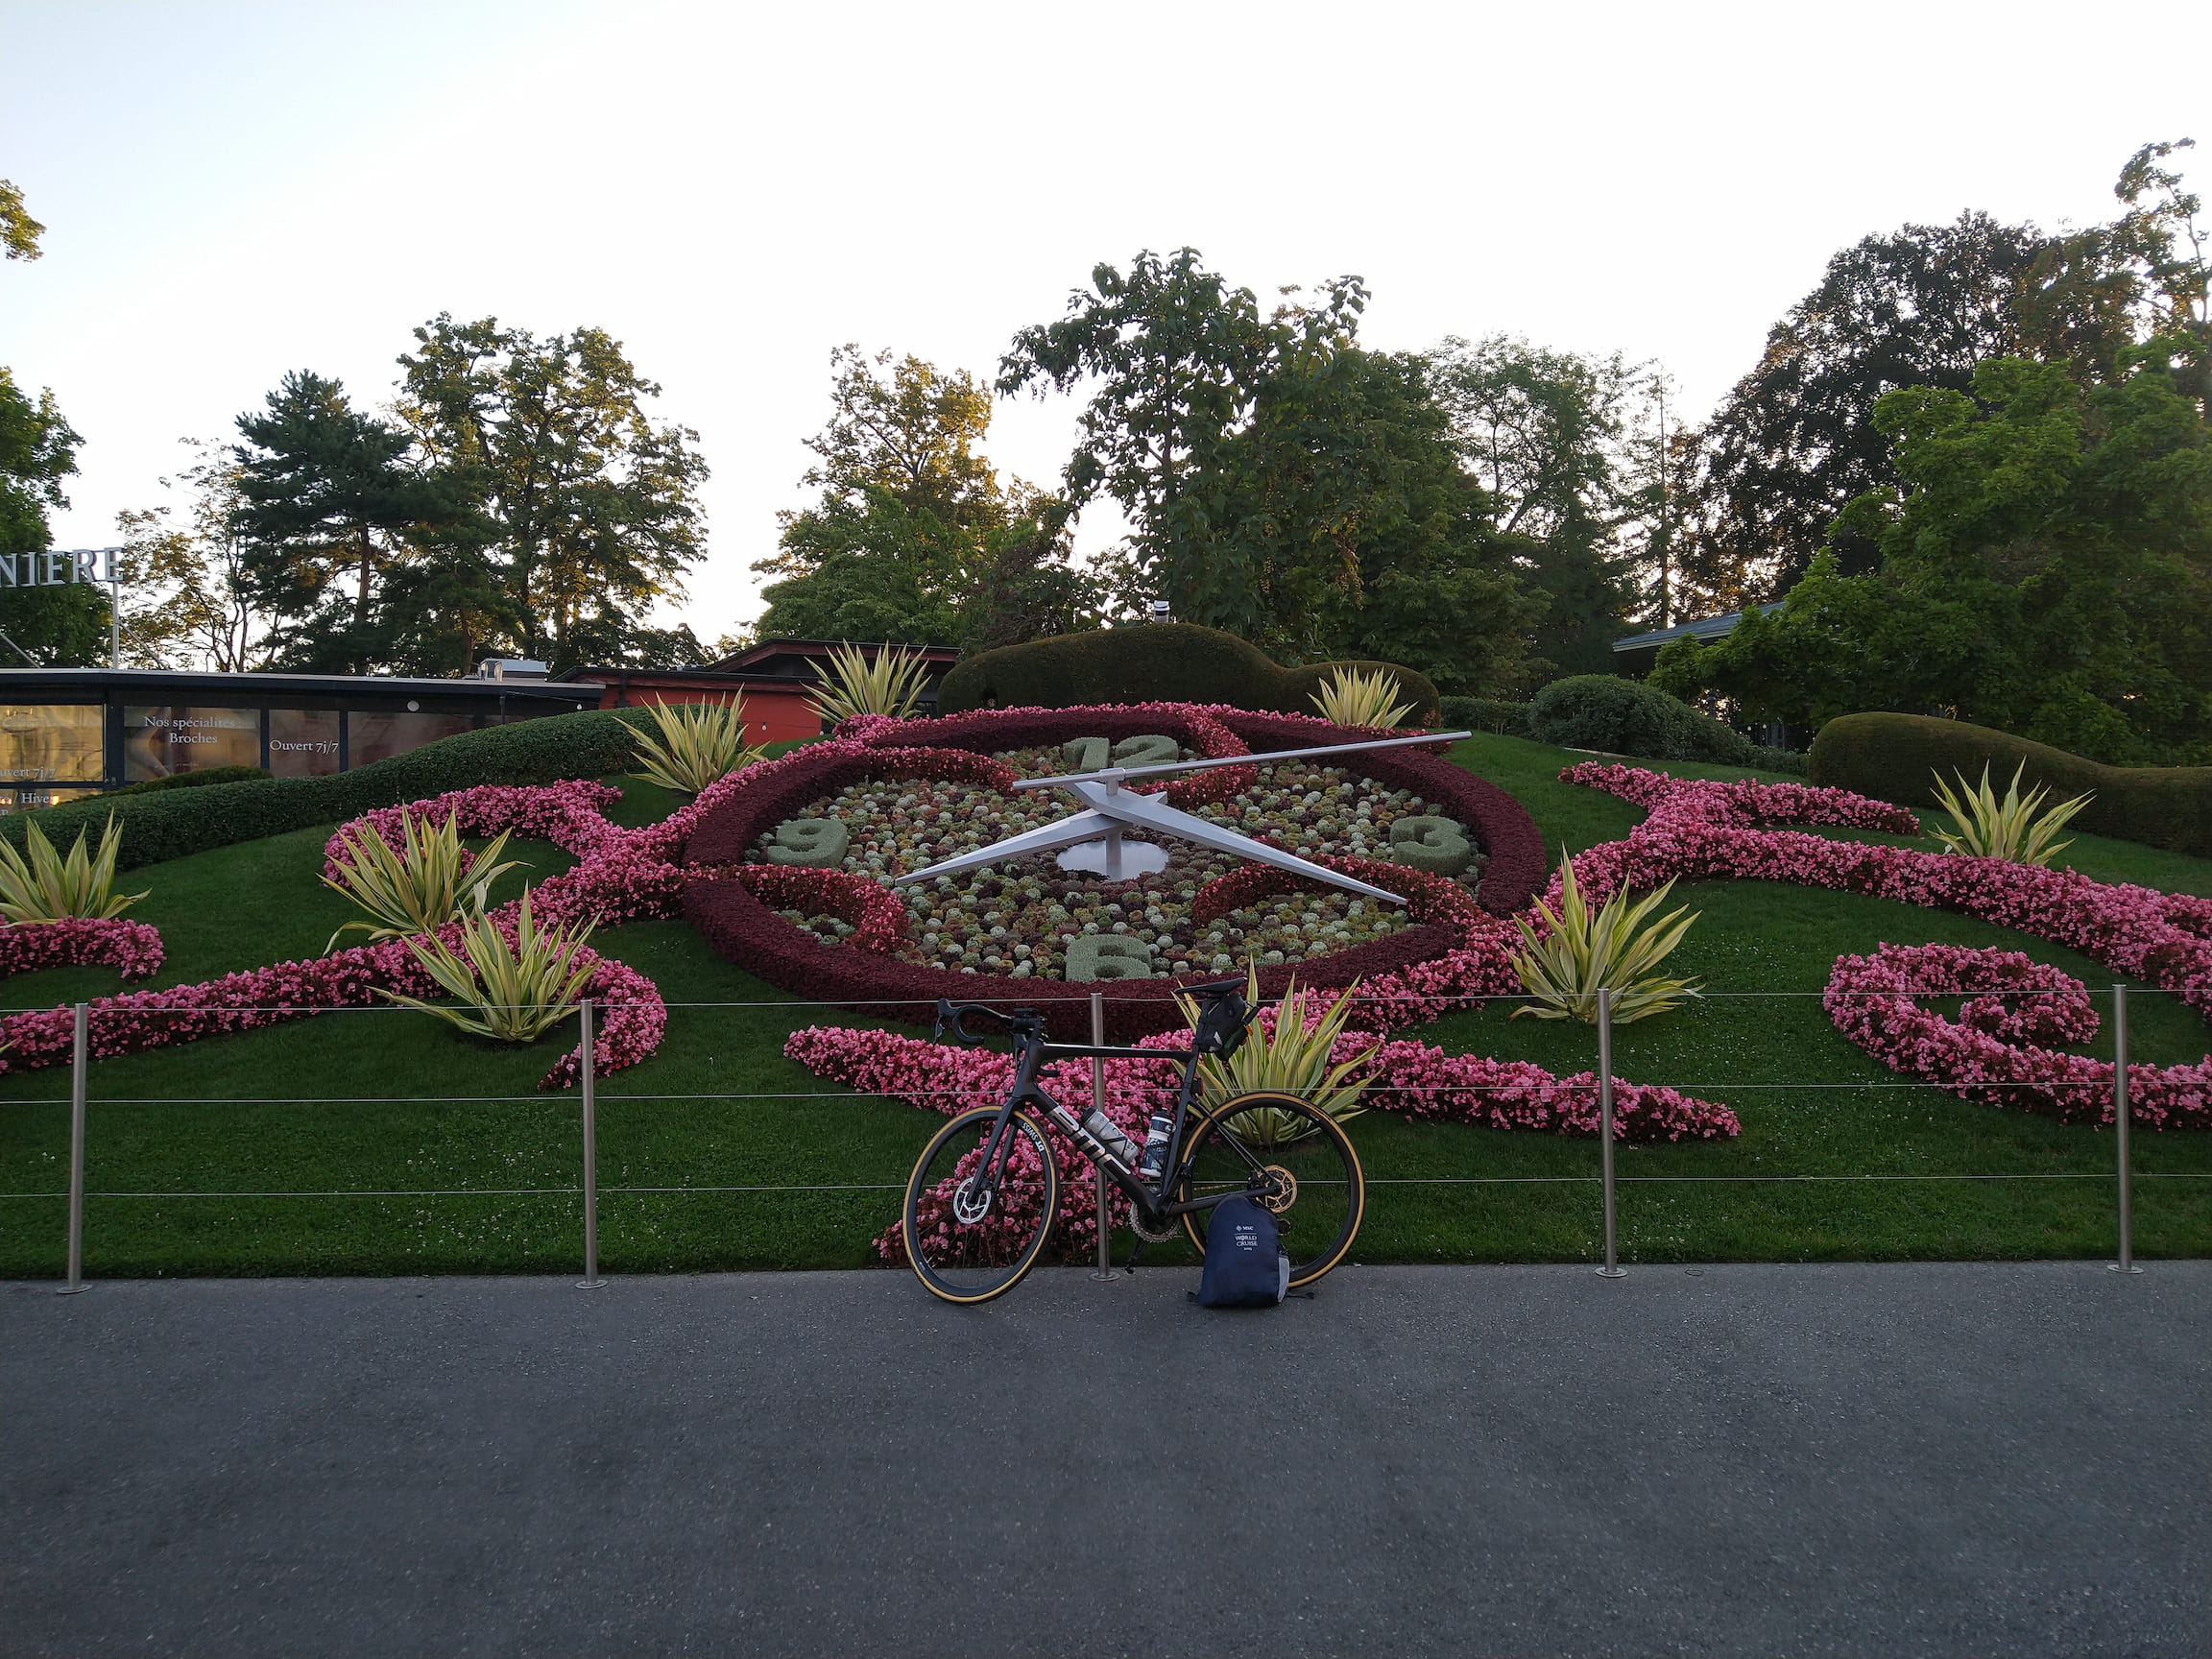 The iconic flower clock in Geneva at the shore of Lac Léman